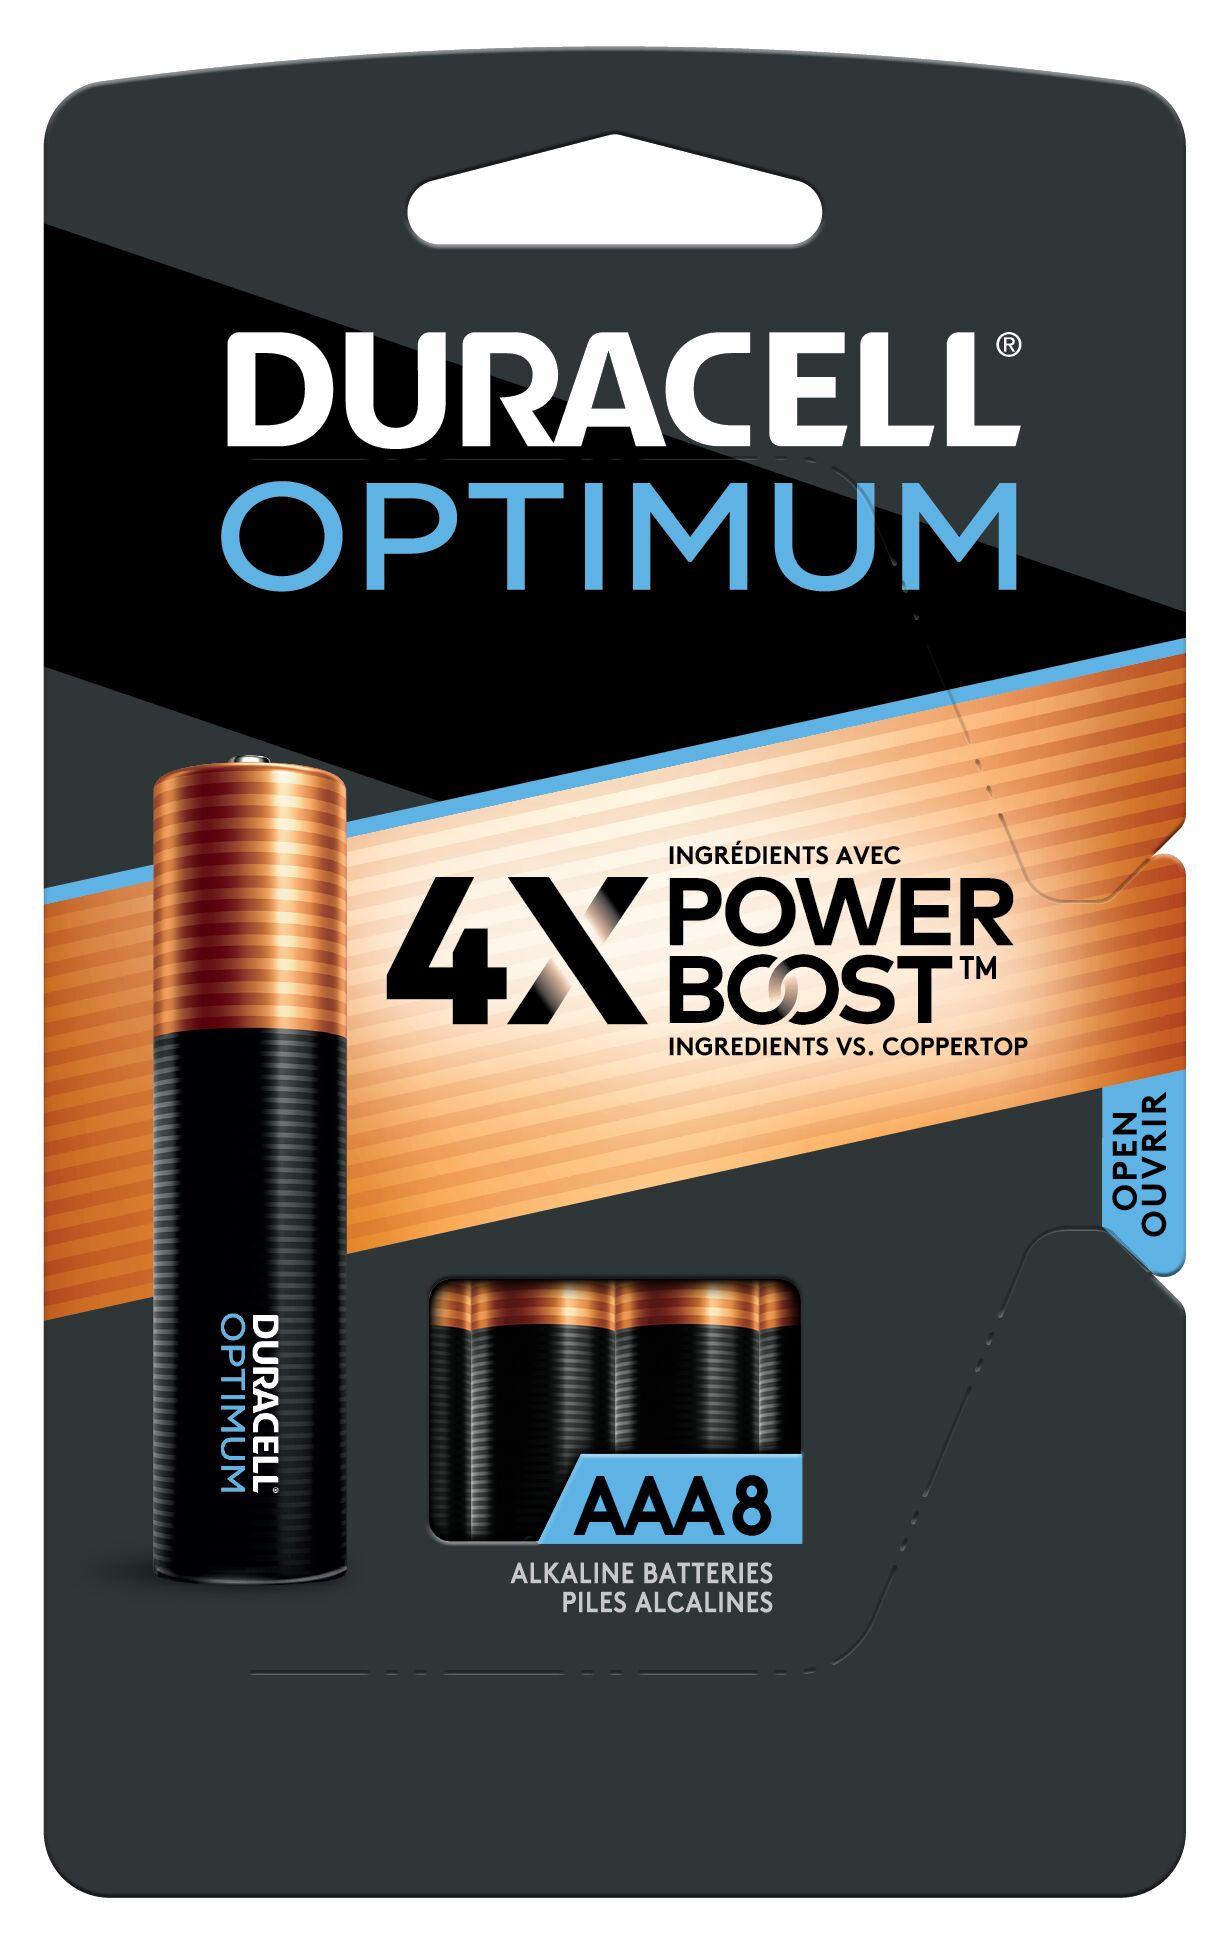 I've tested a lot of AA and AAA batteries, and these are my